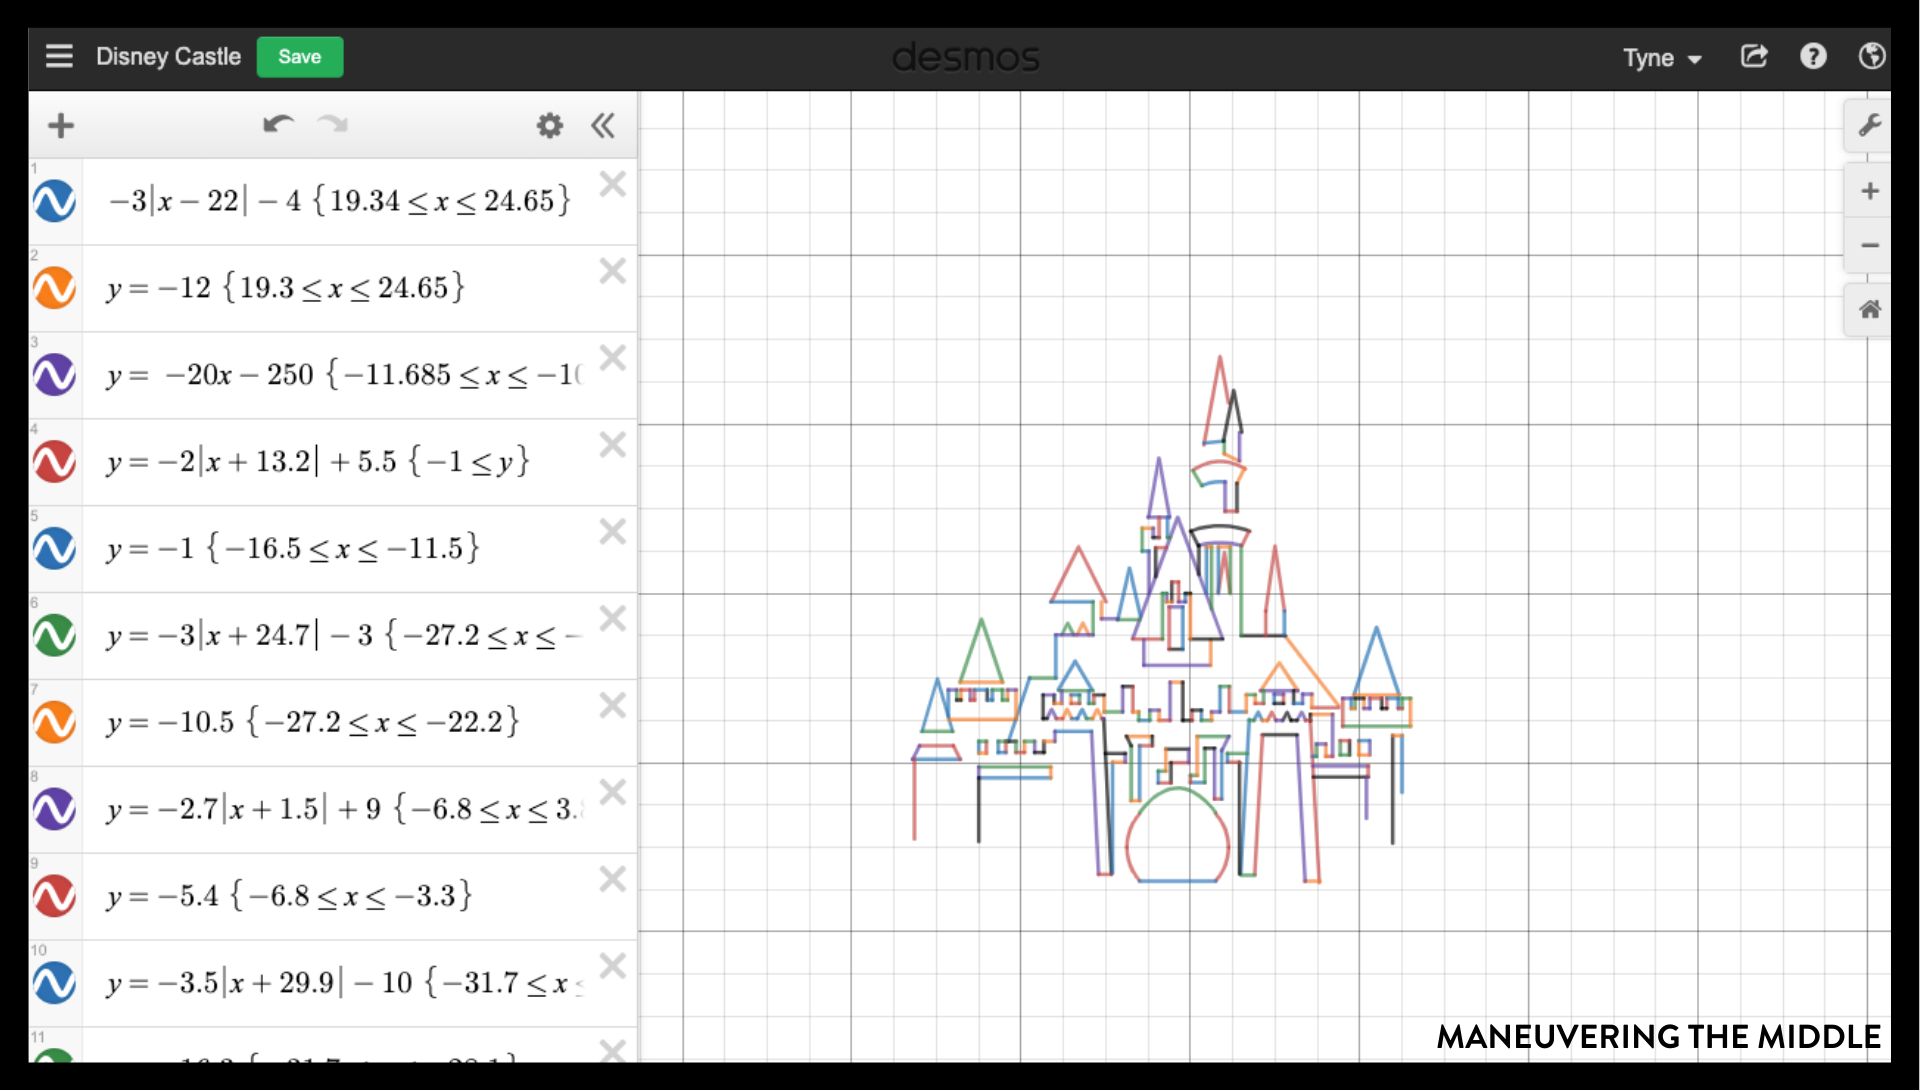 desmos-activities-to-try-in-algebra-1-maneuvering-the-middle